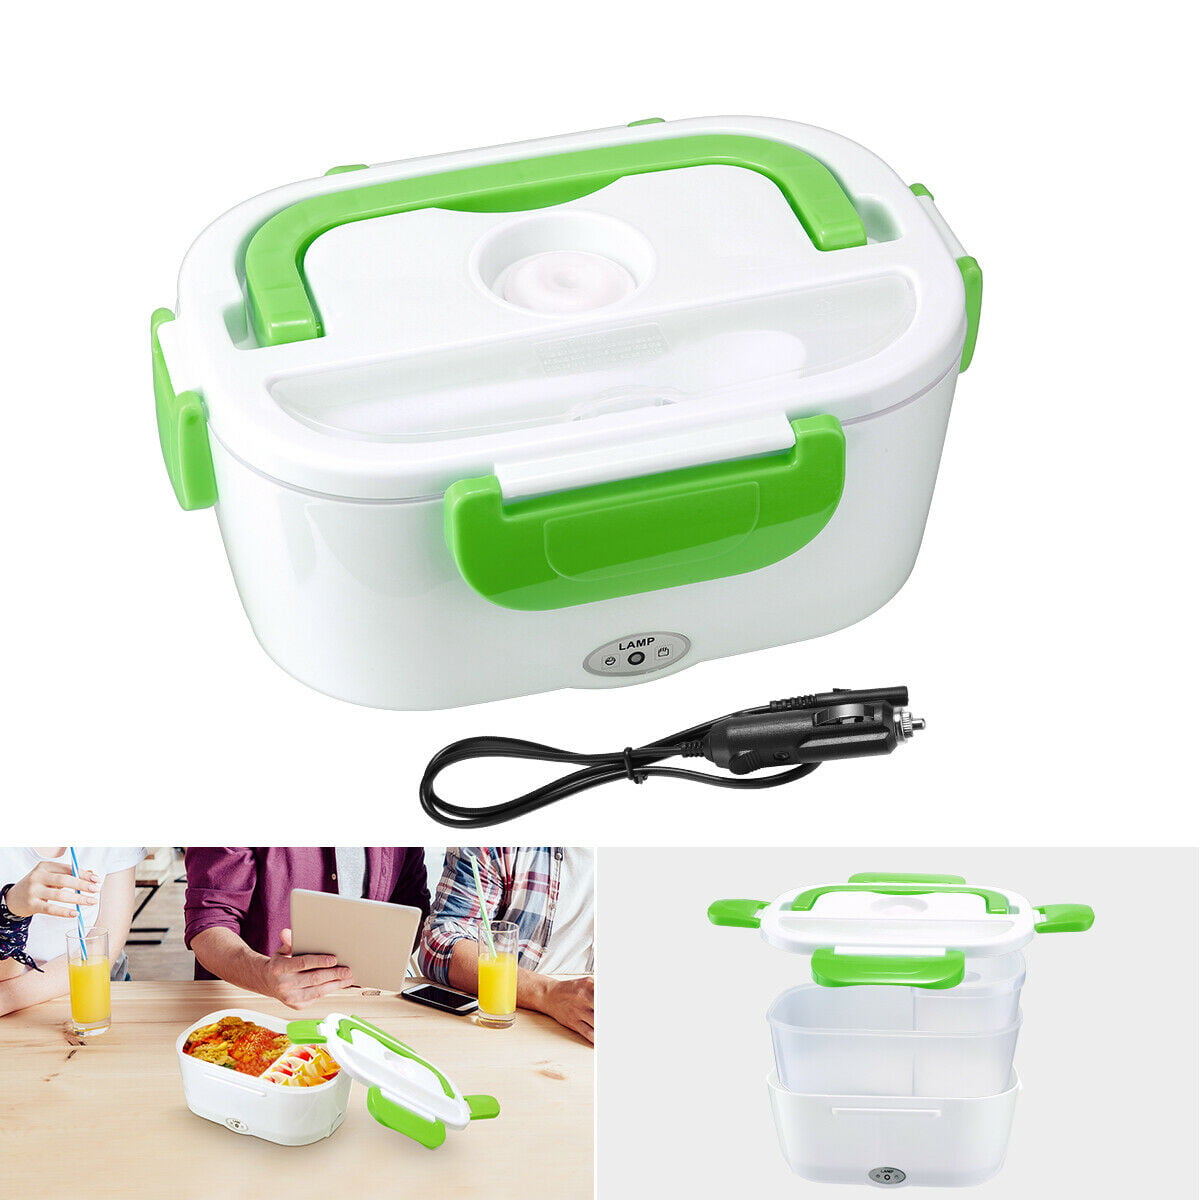 VOVOIR 12V Electric Heating Lunch Box Thermal Bento Box Food Heater Warmer 